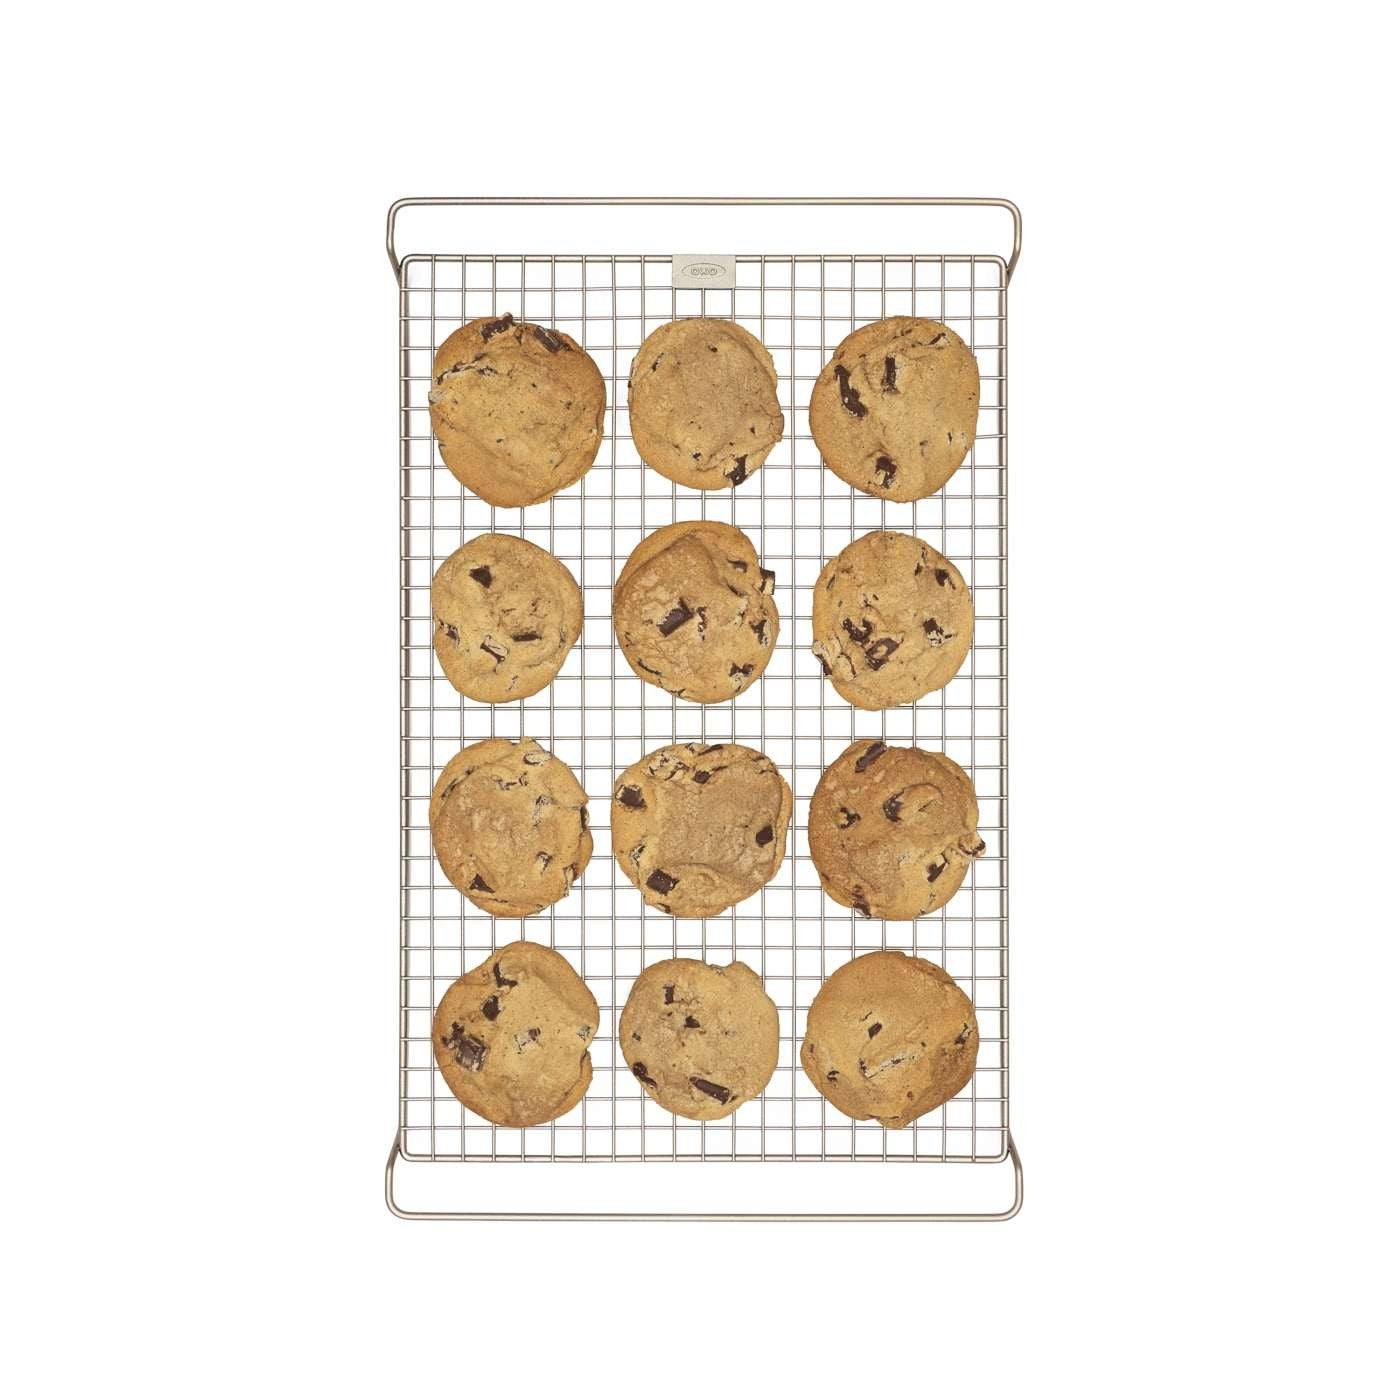 OXO Good Grips Non-Stick Wire Cooling Rack